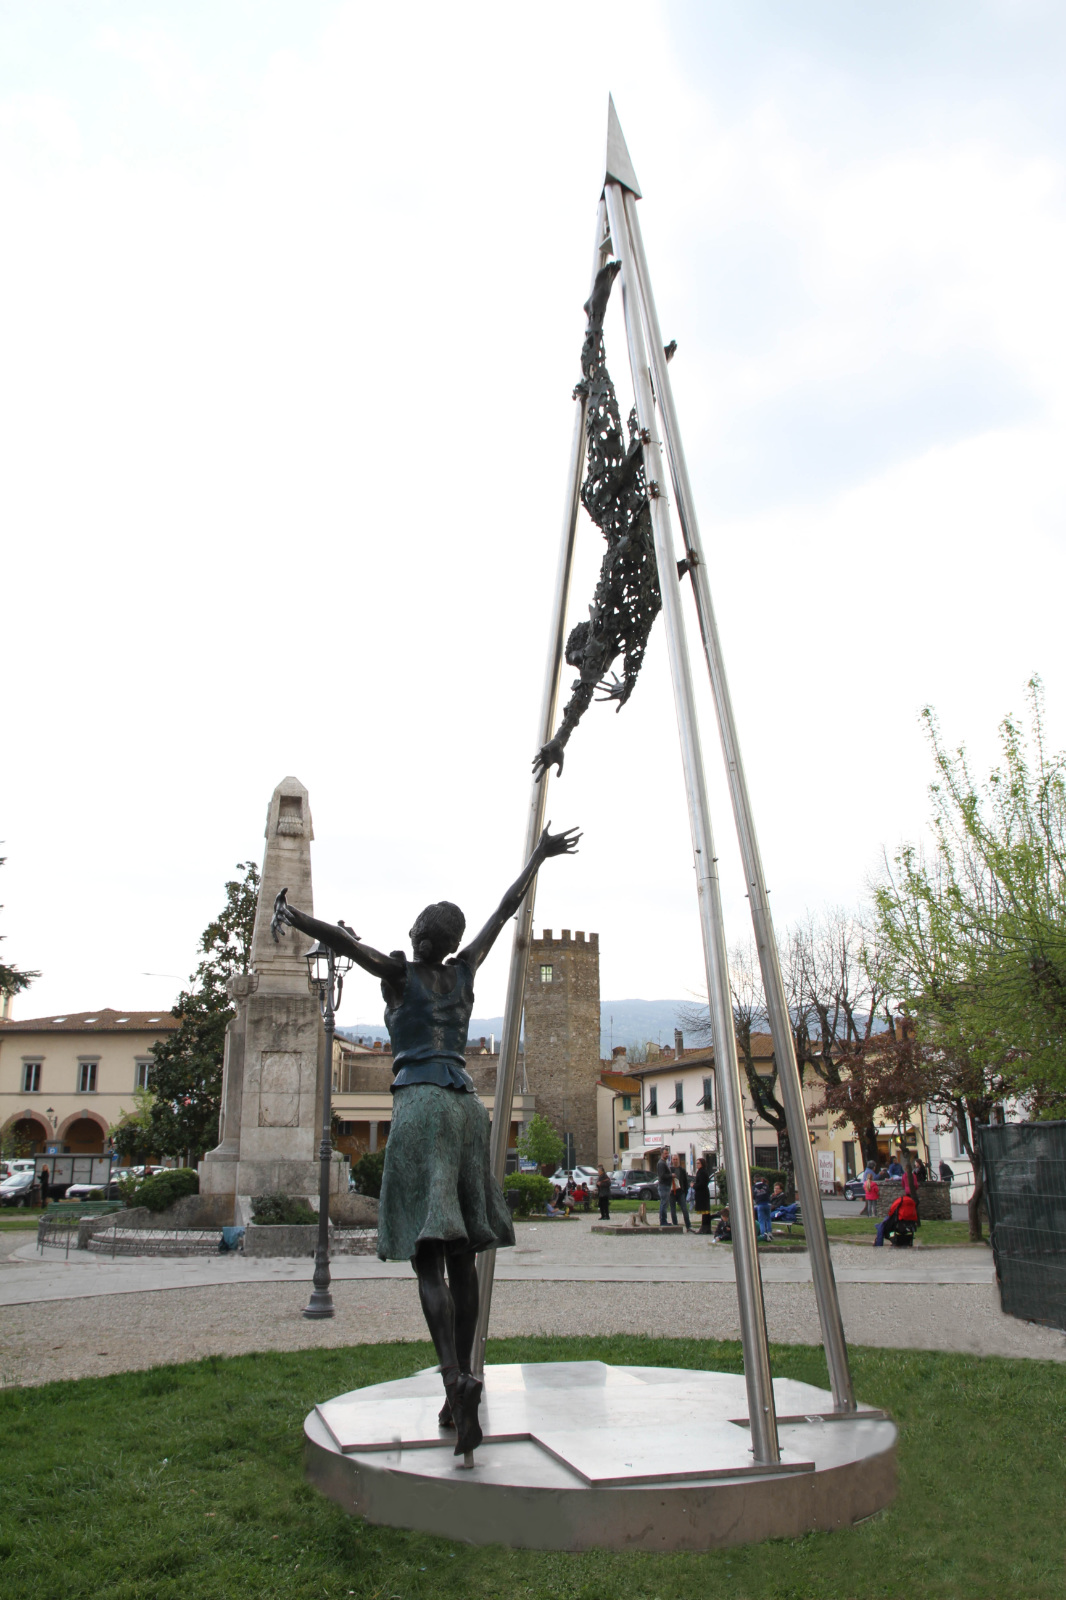 2019 “Life and Death”Memorial to victims of warand terrorism, Vicchio, Tuscany